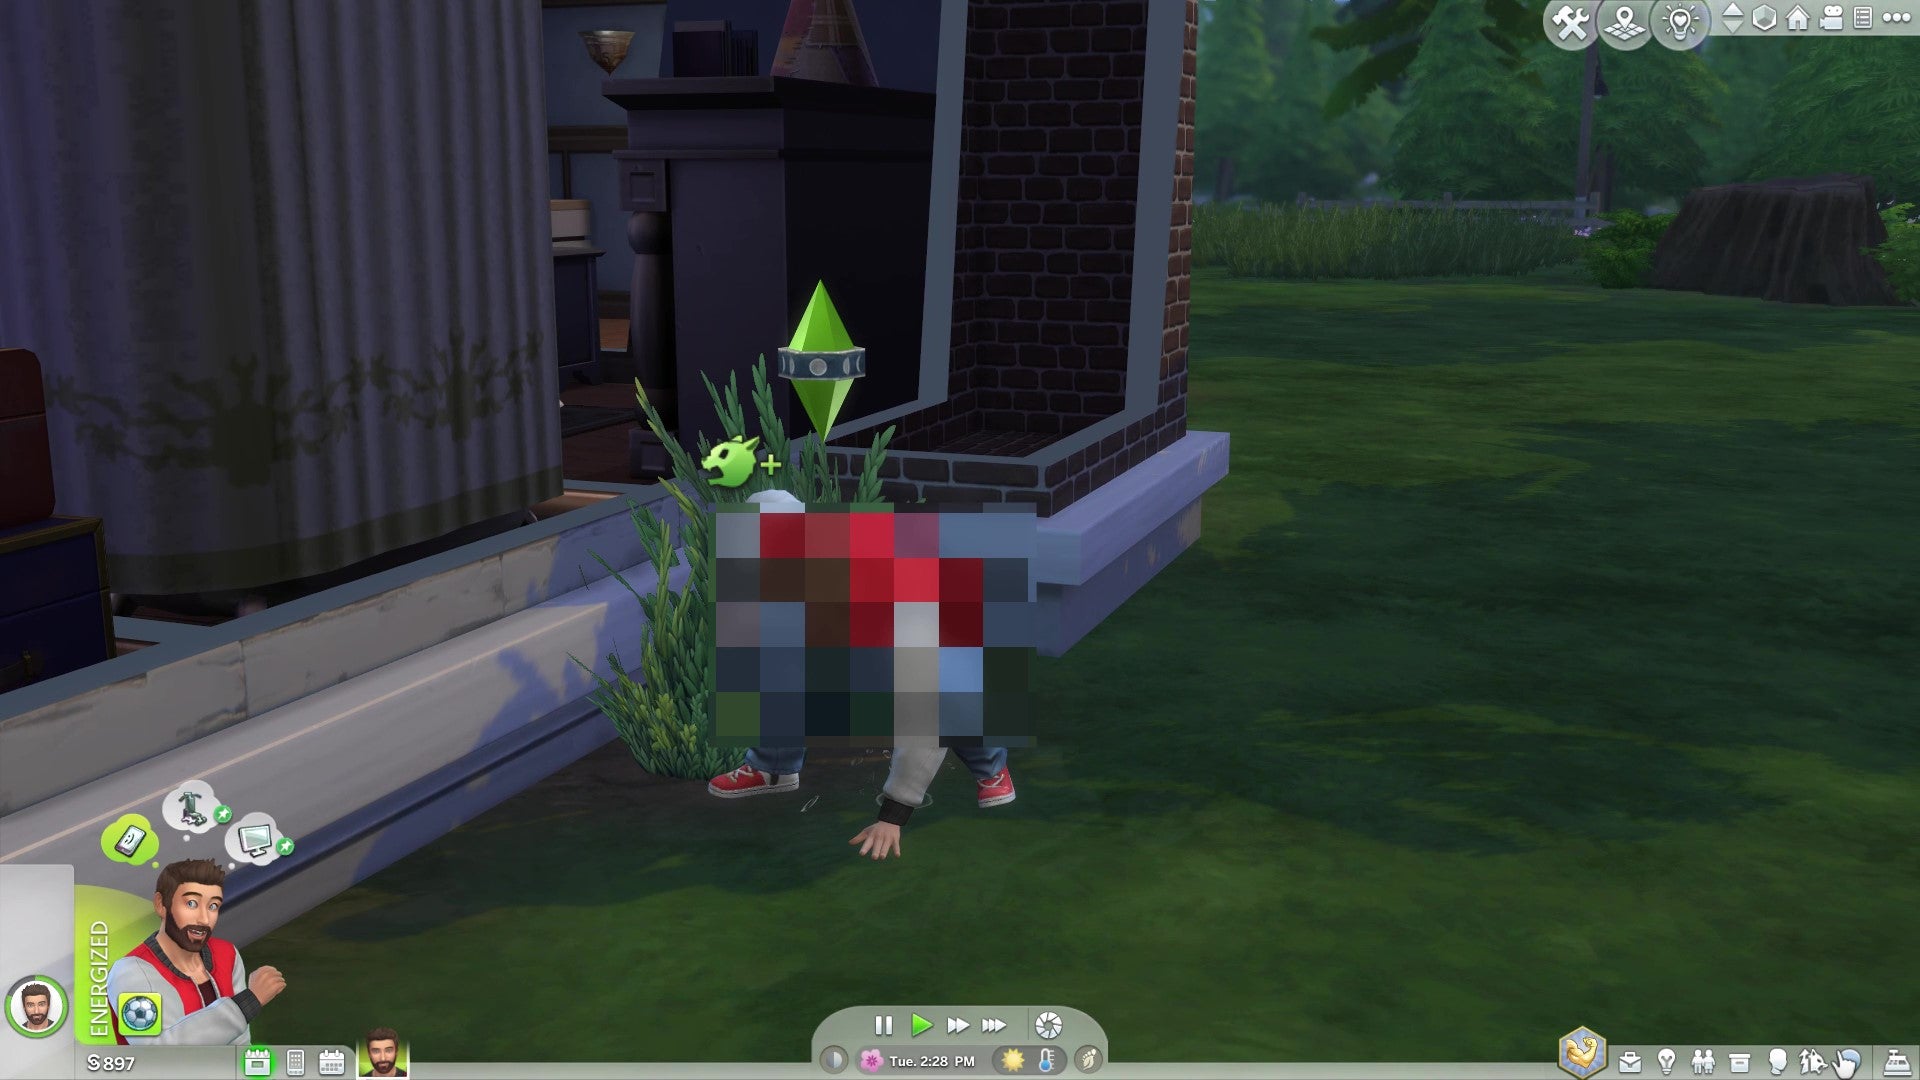 A werewolf Sim "marking his territory" by urinating on his lawn in The Sims 4: Werewolves.